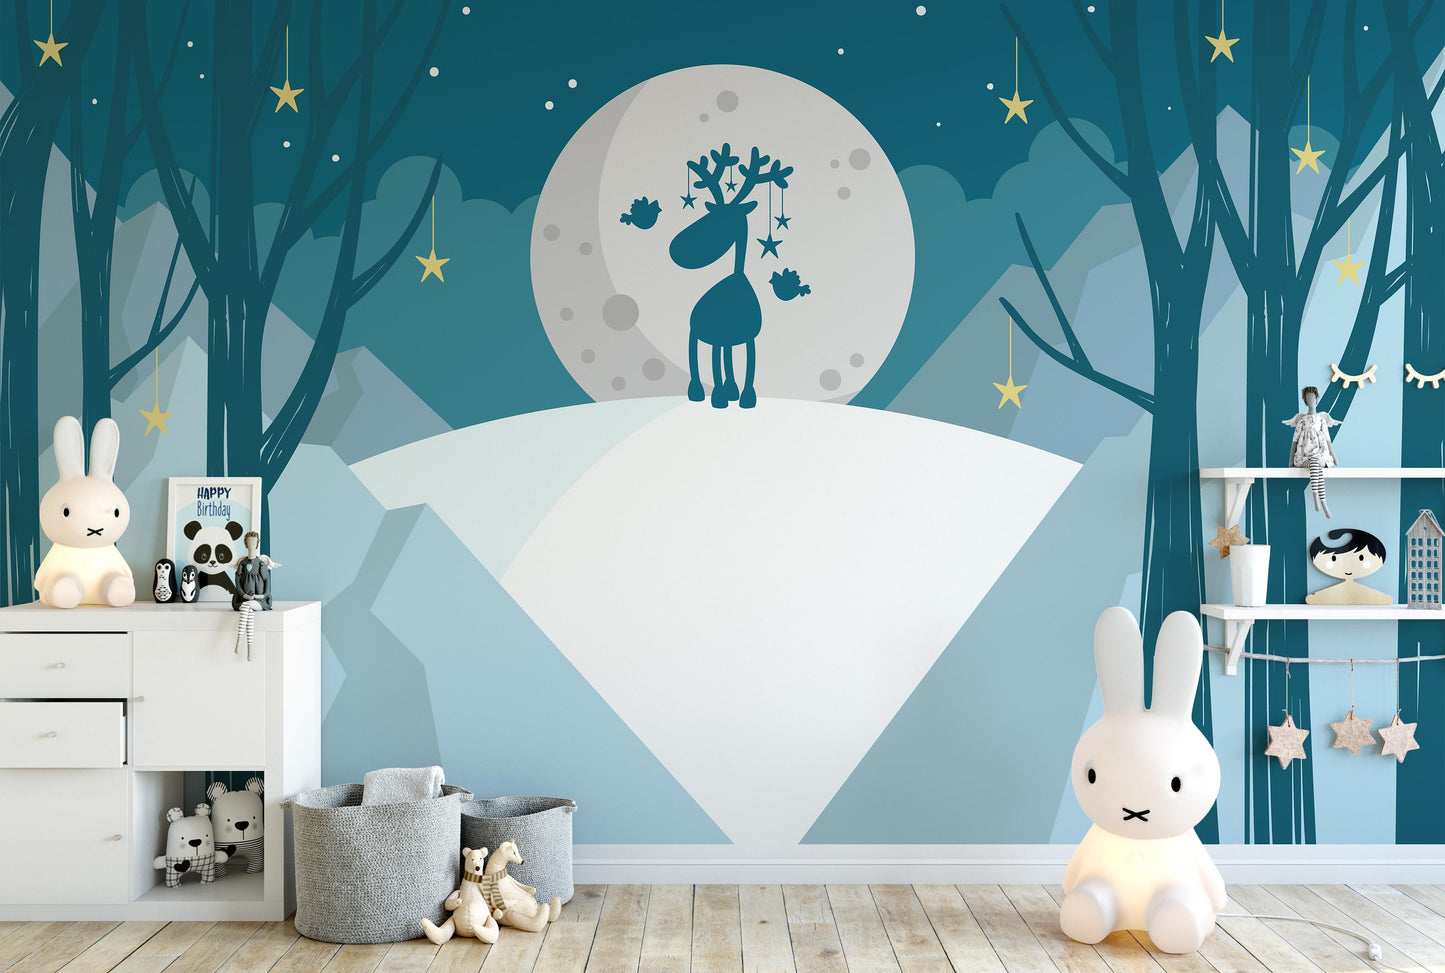 Removable Peel and Stick Wallpaper Forest Trees Deer Wall Paper Wall Murals, KL0057